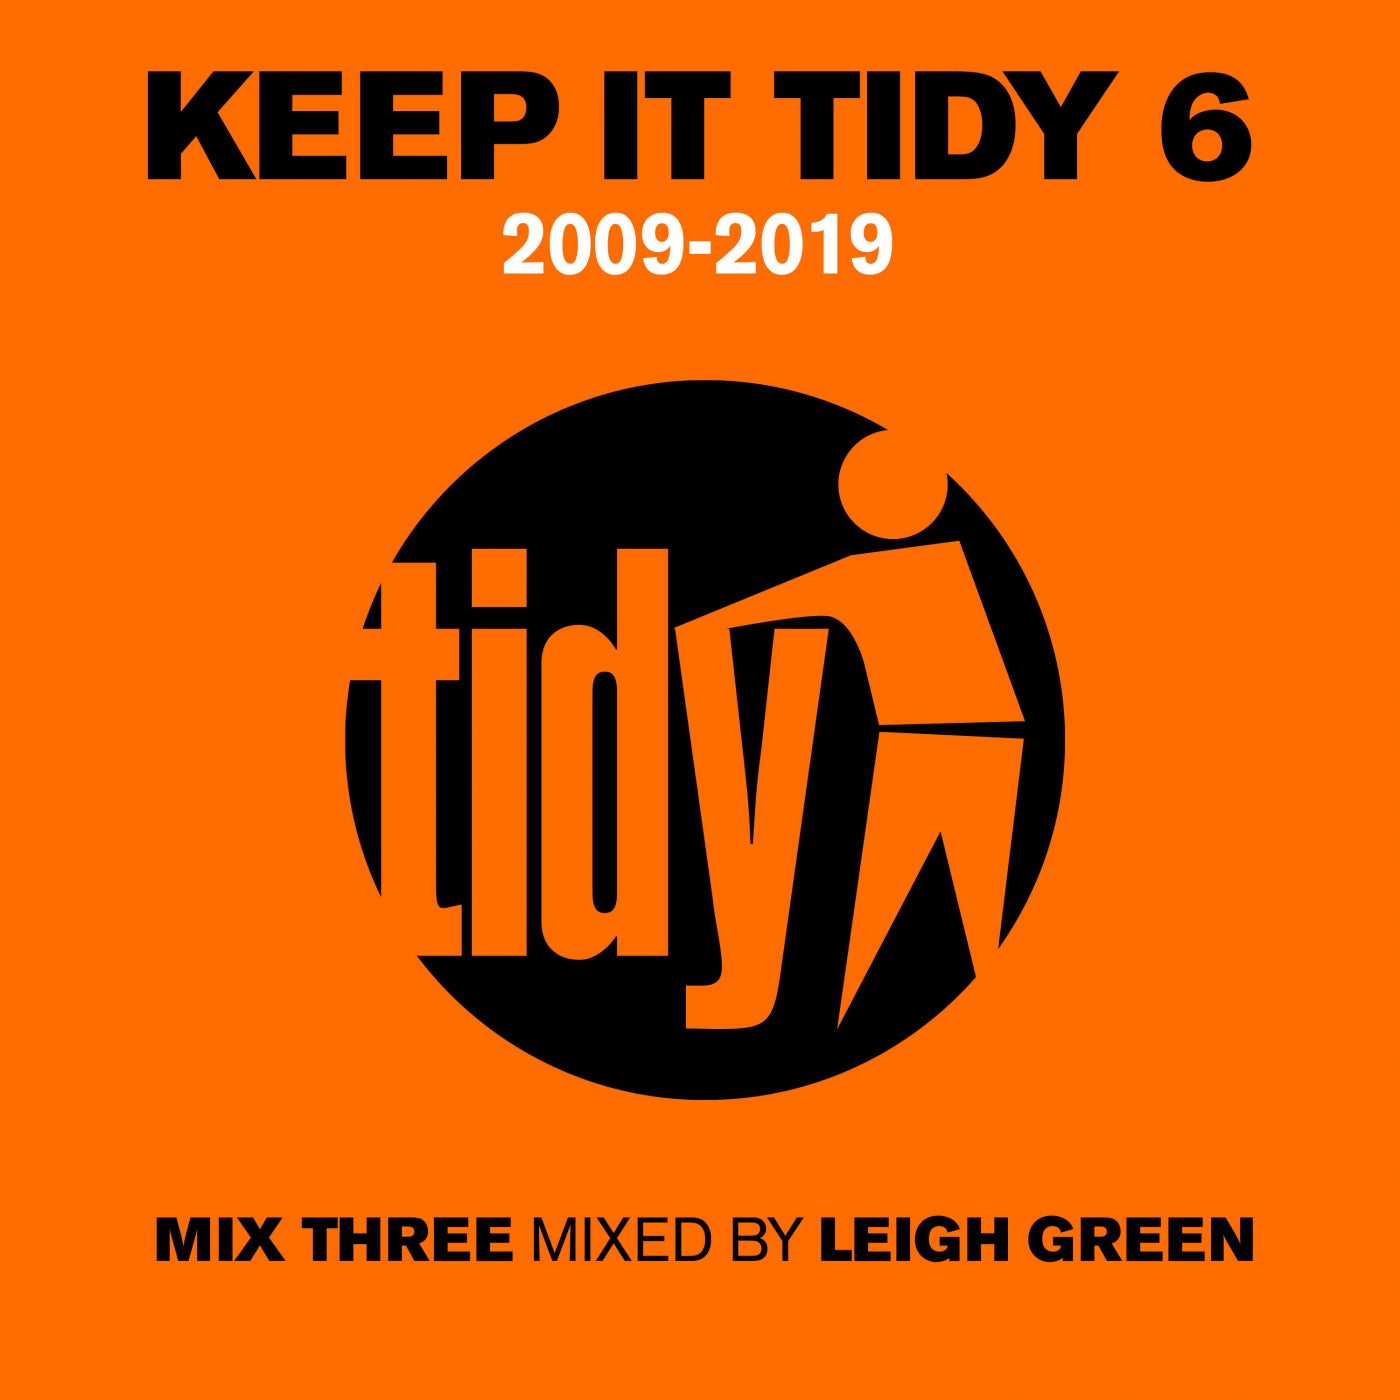 Keep It Tidy 6 - Mixed by Leigh Green